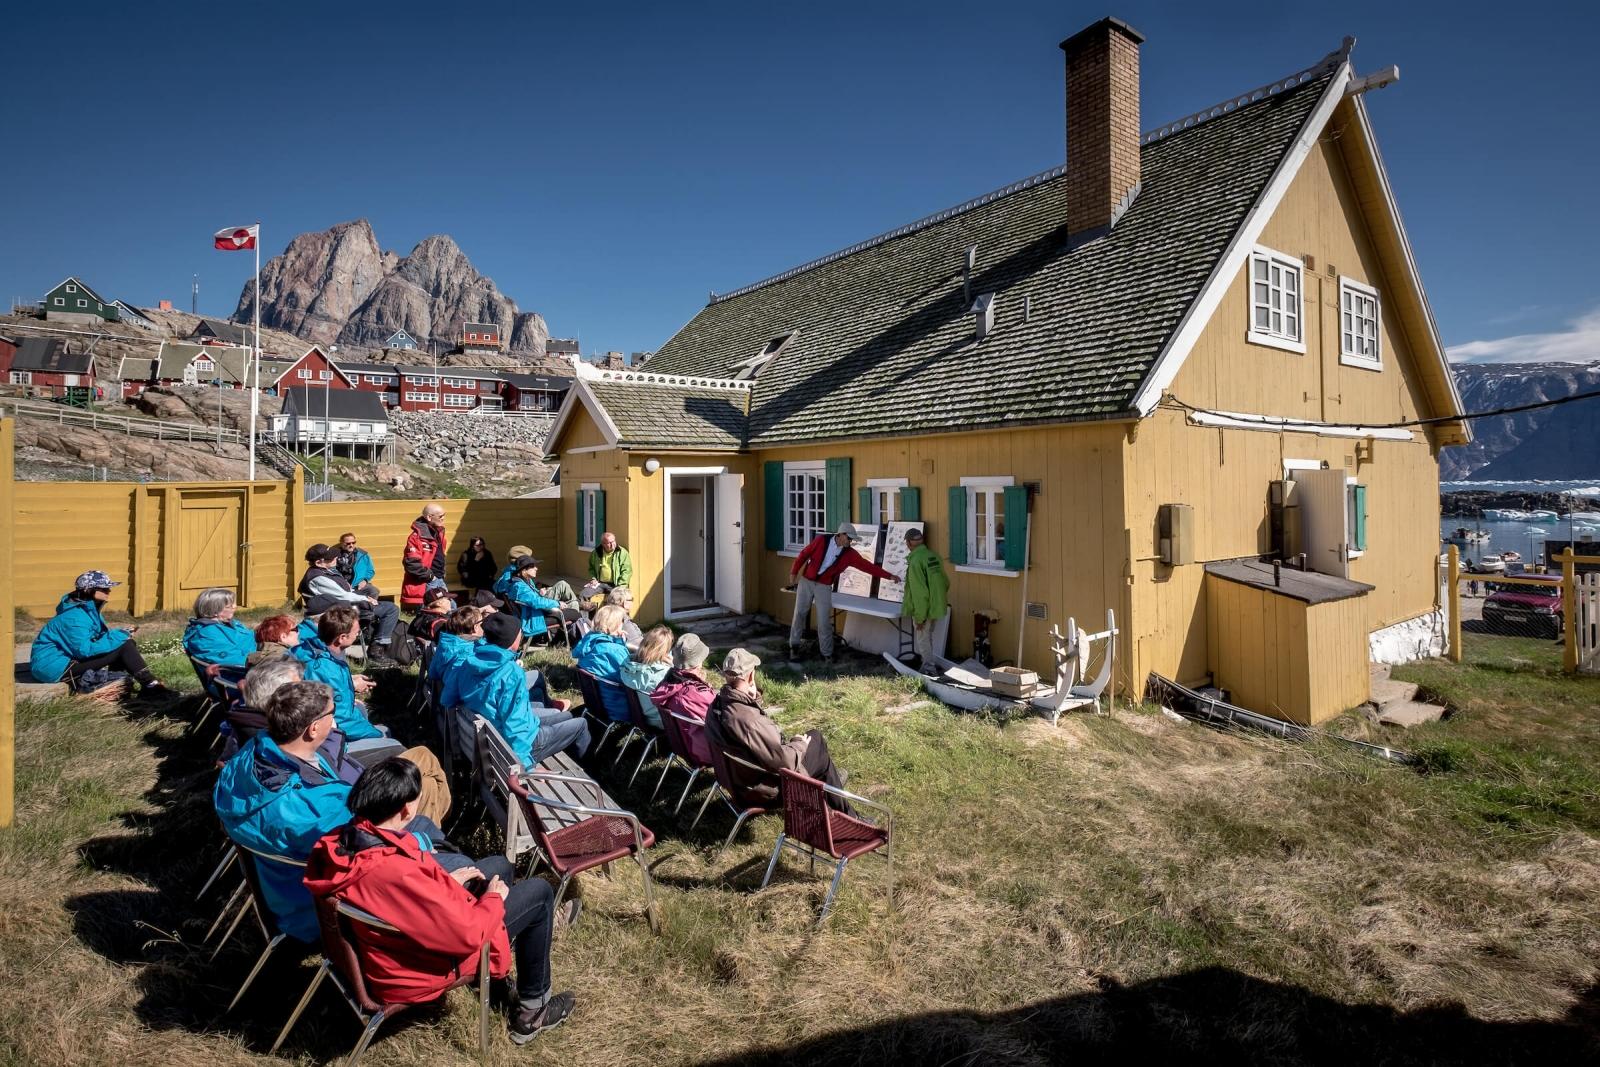 A presentation for MS Fram guests at the Uummannaq museum in Greenland. By Mads Pihl